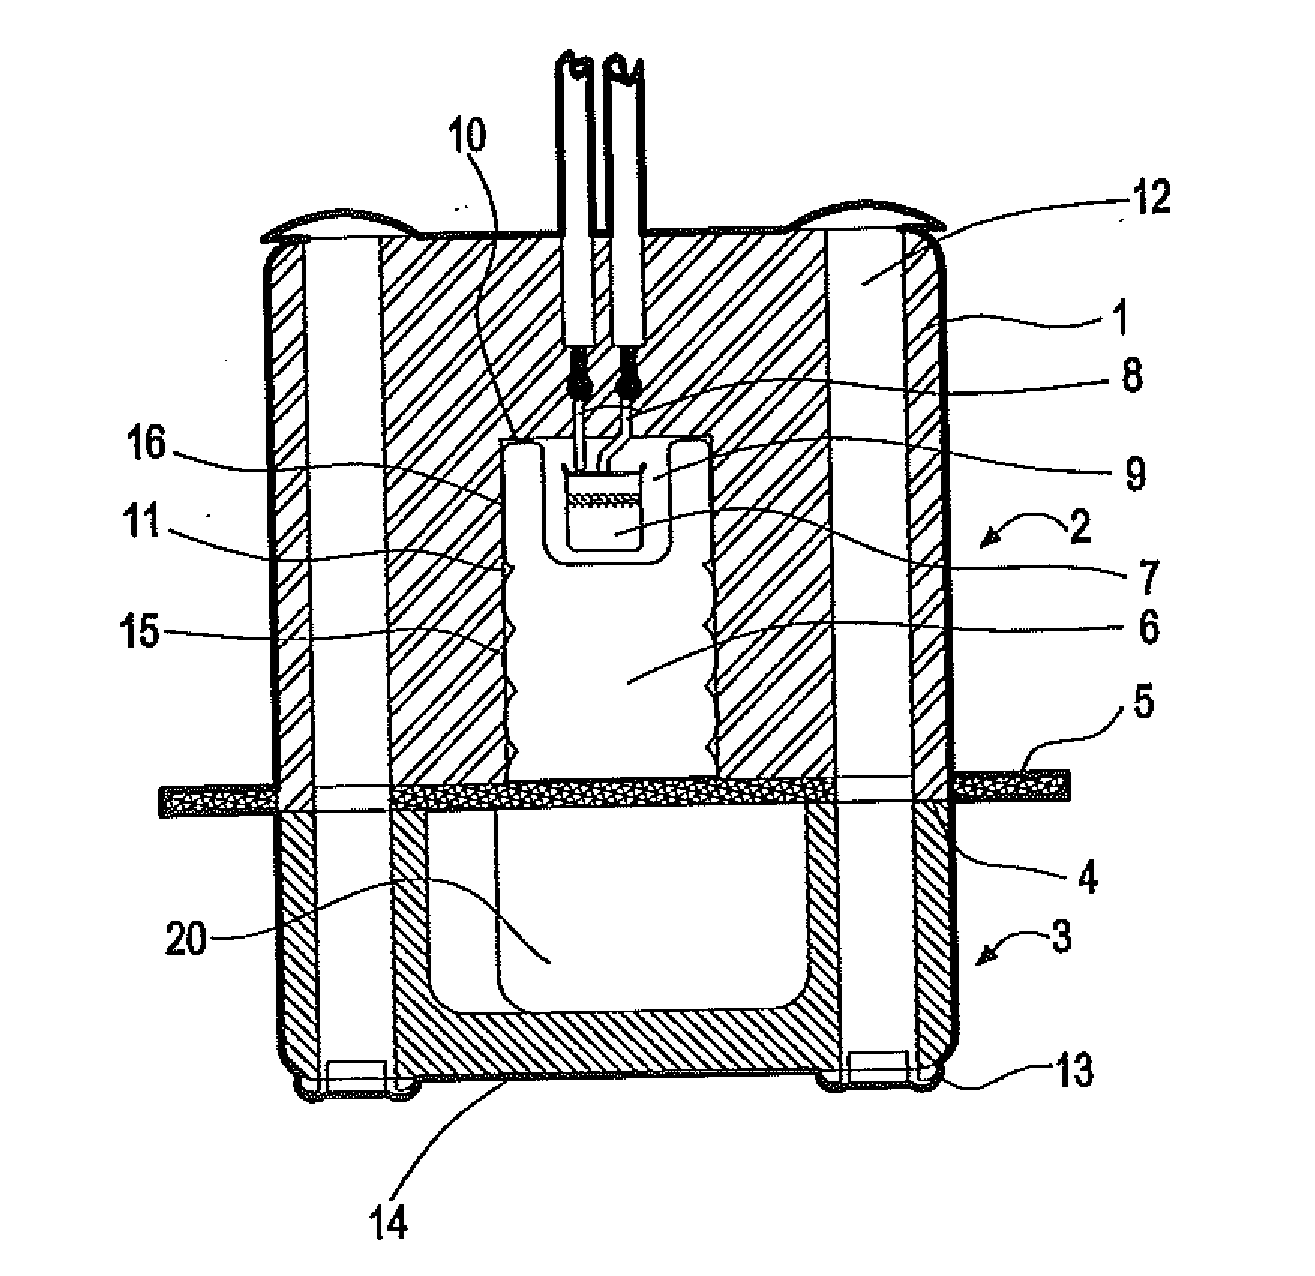 Pyrotechnic actuator and method of actuating a pyrotechnic actuator